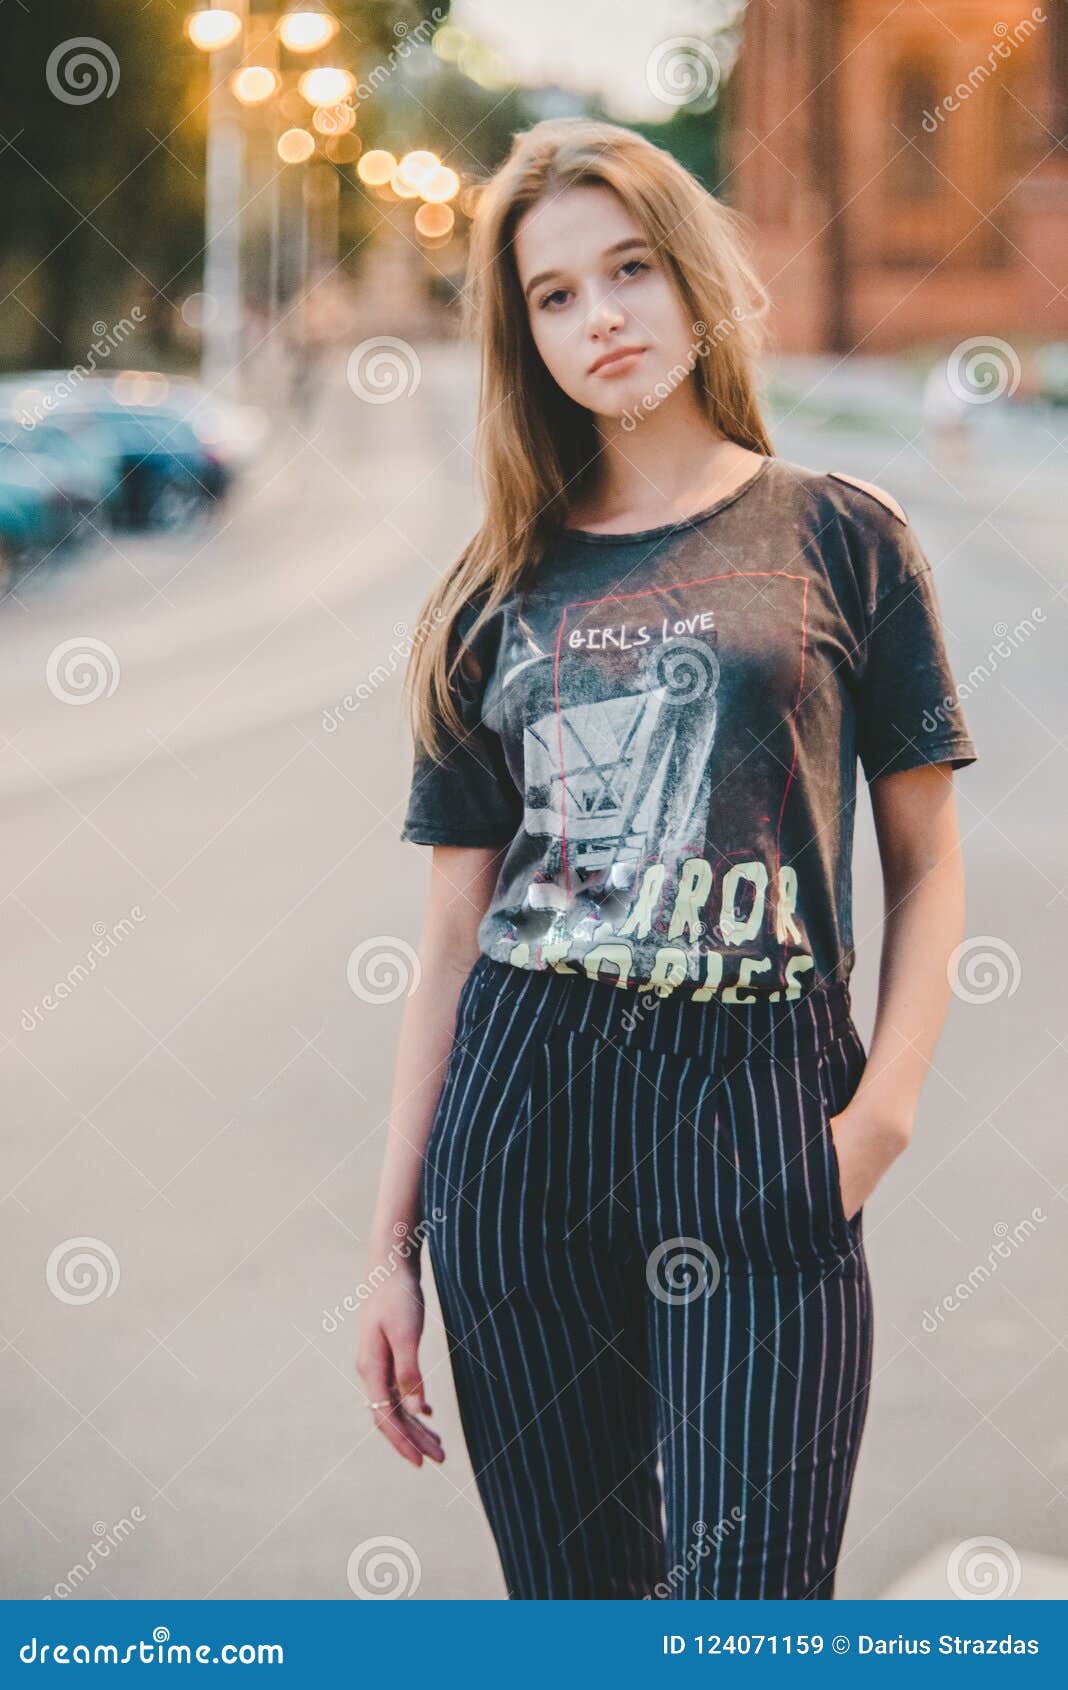 Cute Teen Girl In A City Stock Image Image Of Smile 124071159